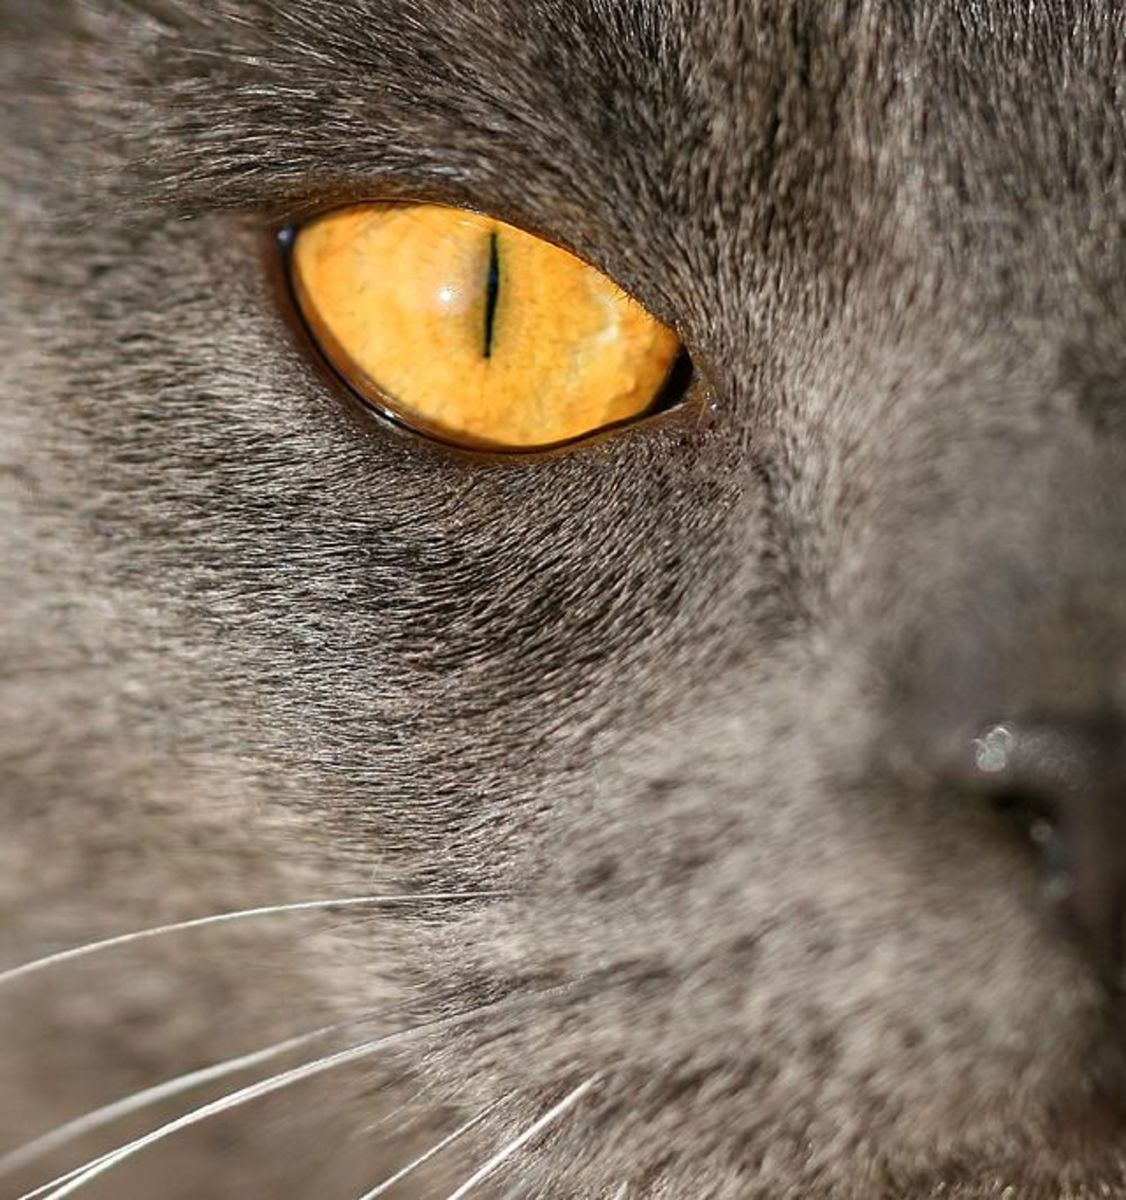 What Is Wrong With My Cat's Eye?